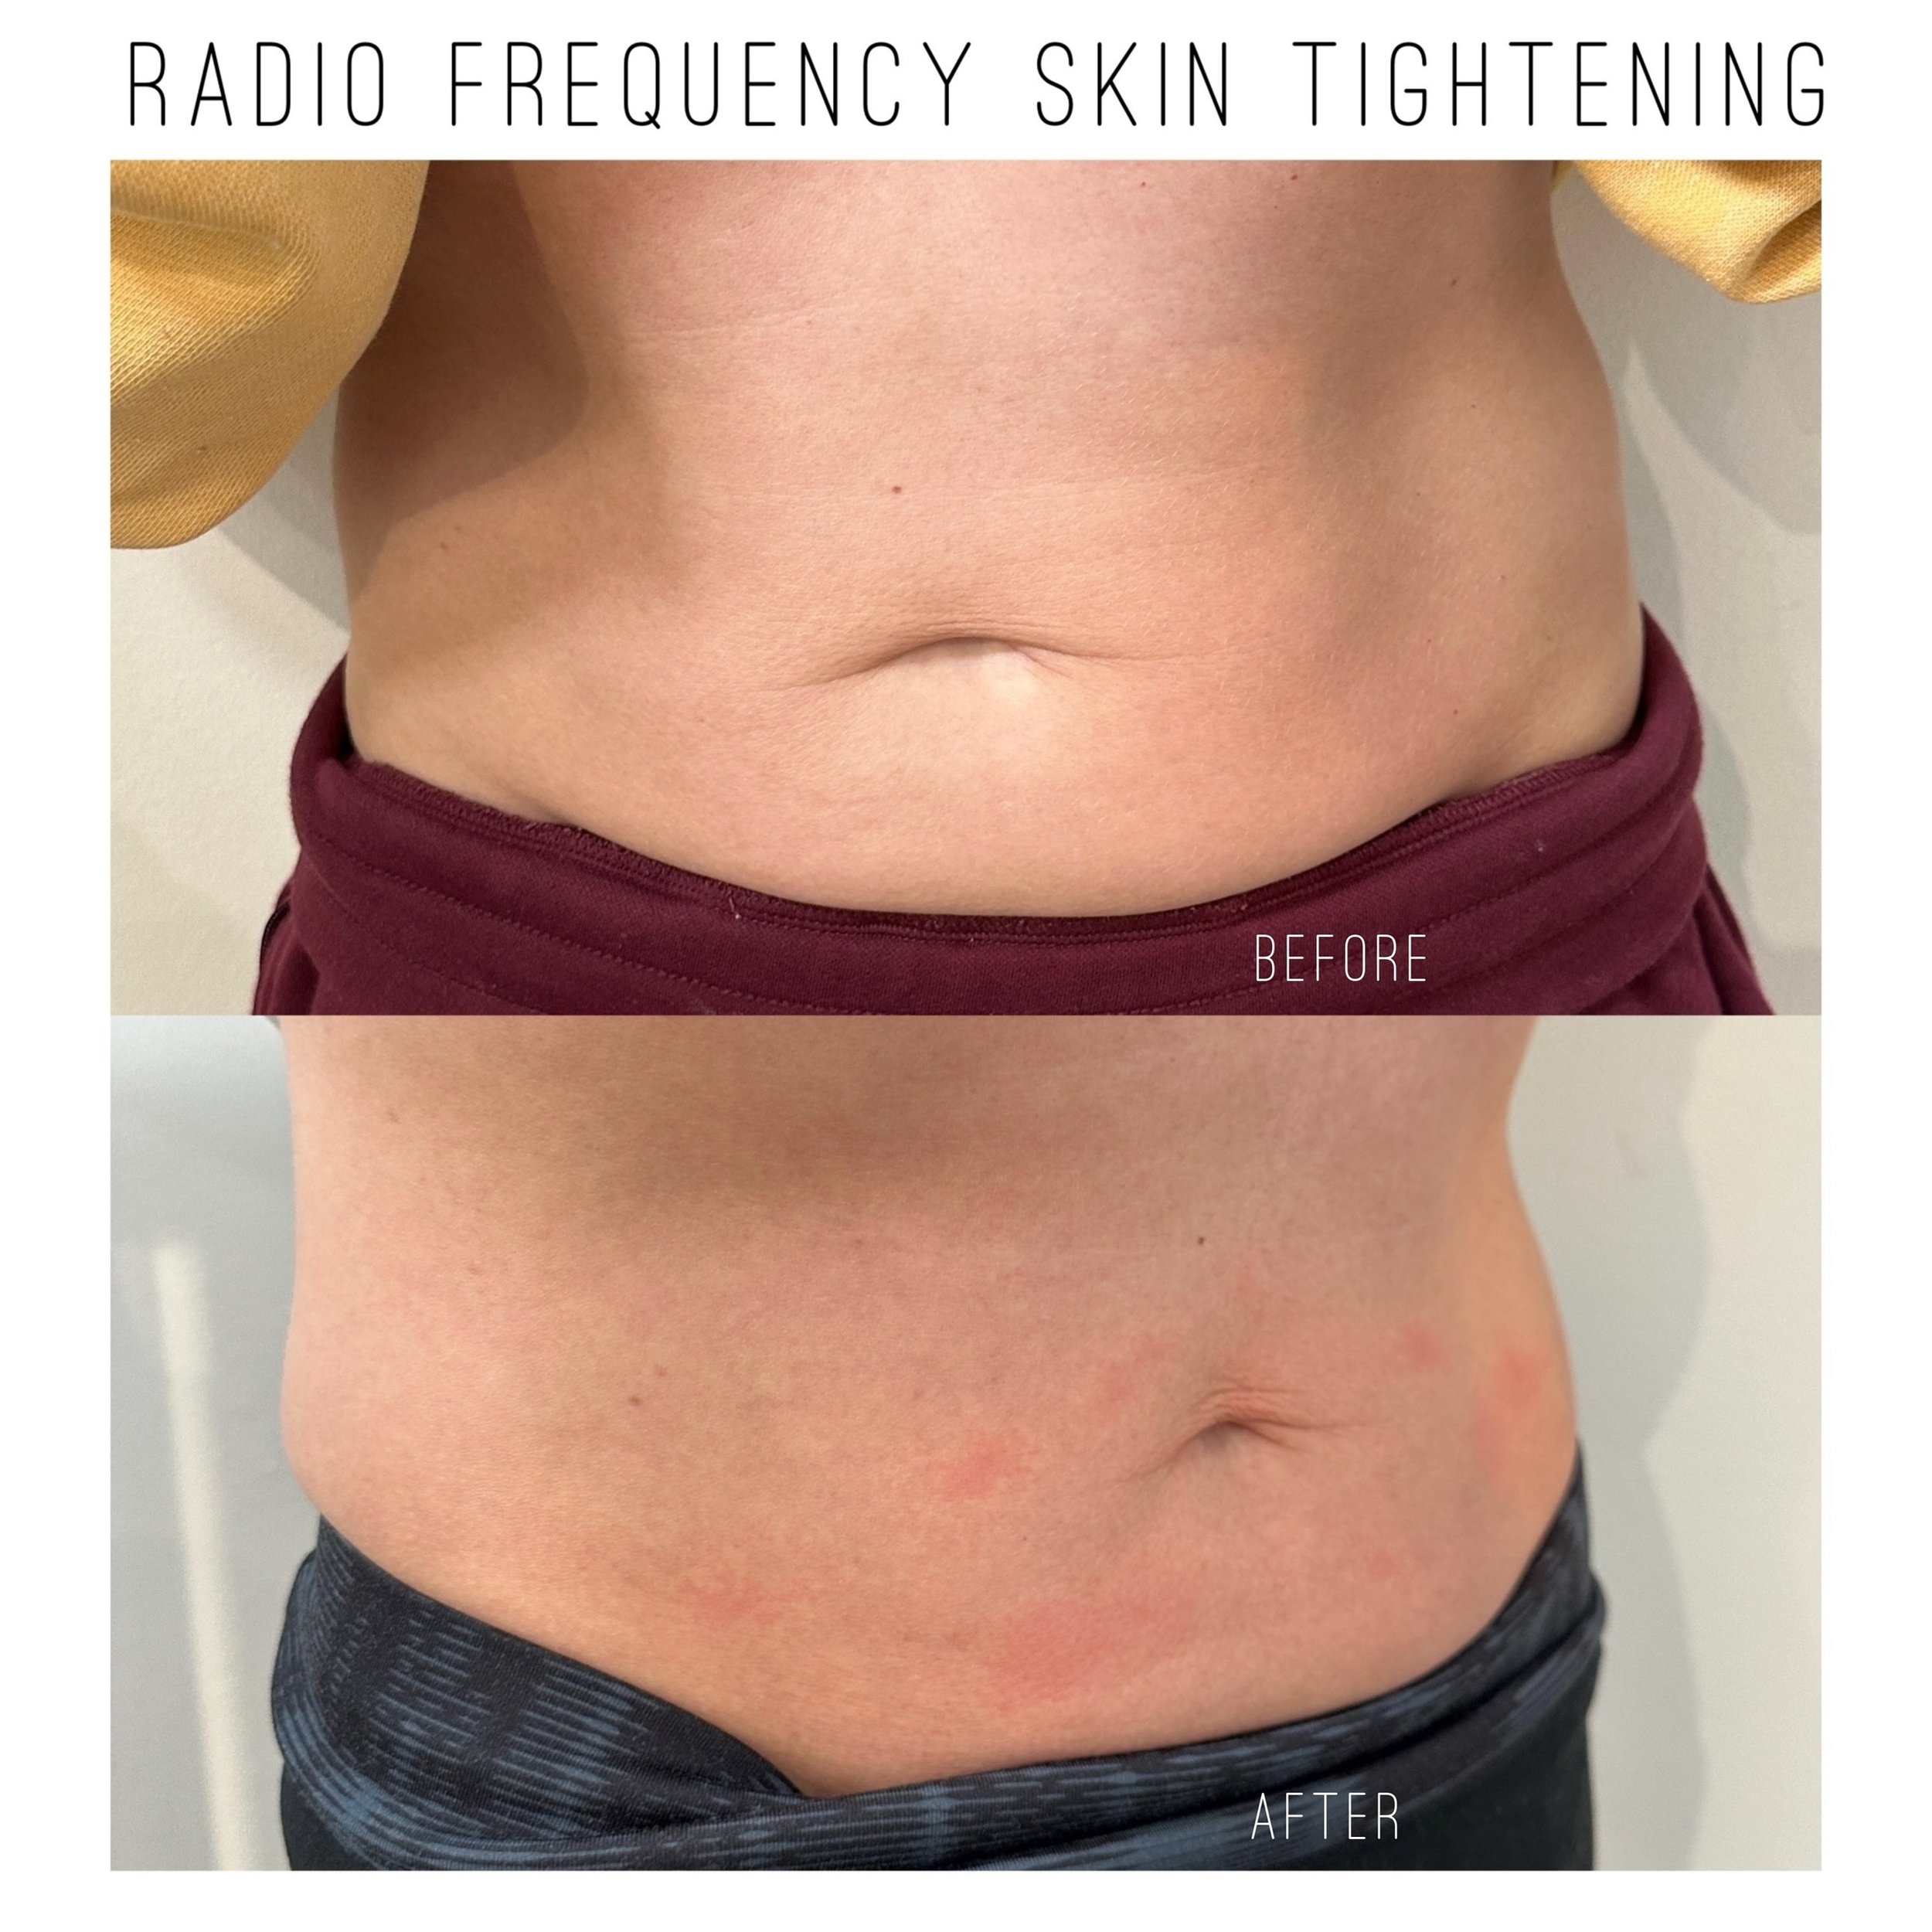 2 treatments ✨ Radio Frequency (RF) Therapy is an effective anti aging treatment that reverses the appearance of wrinkles, tightens sagging skin, and can even make crepey hands and necks appear firmer and more youthful.

Using radio waves, this treat